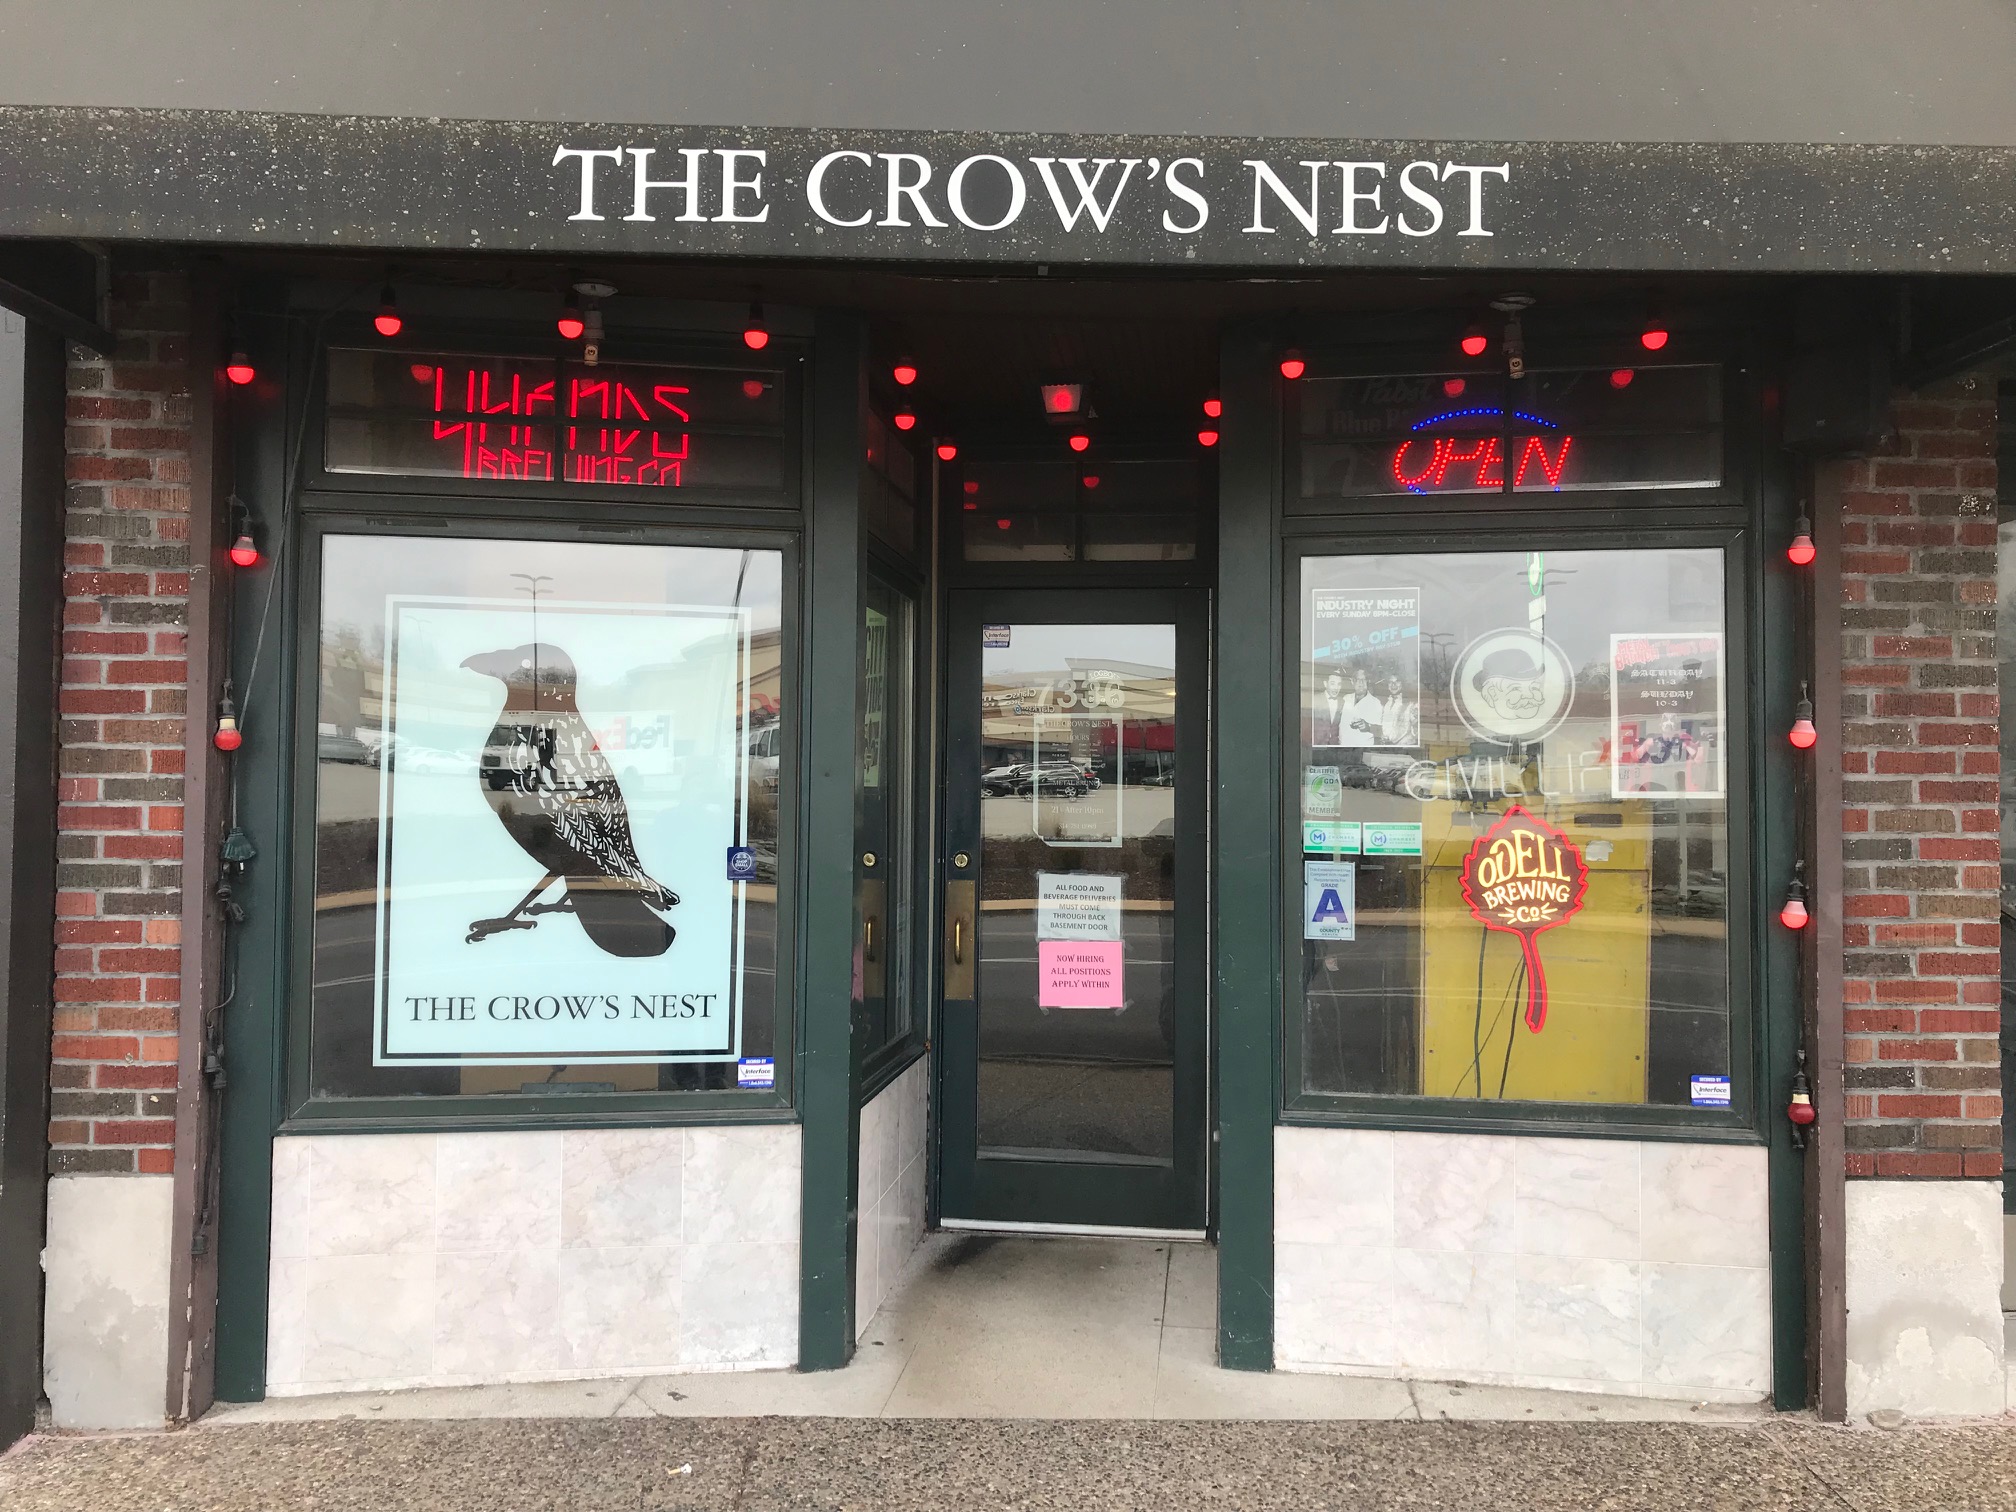 Crow’s Nest, Loco Tacoz, Benevolent King, Pizza Champ and other Maplewood restaurants in the news